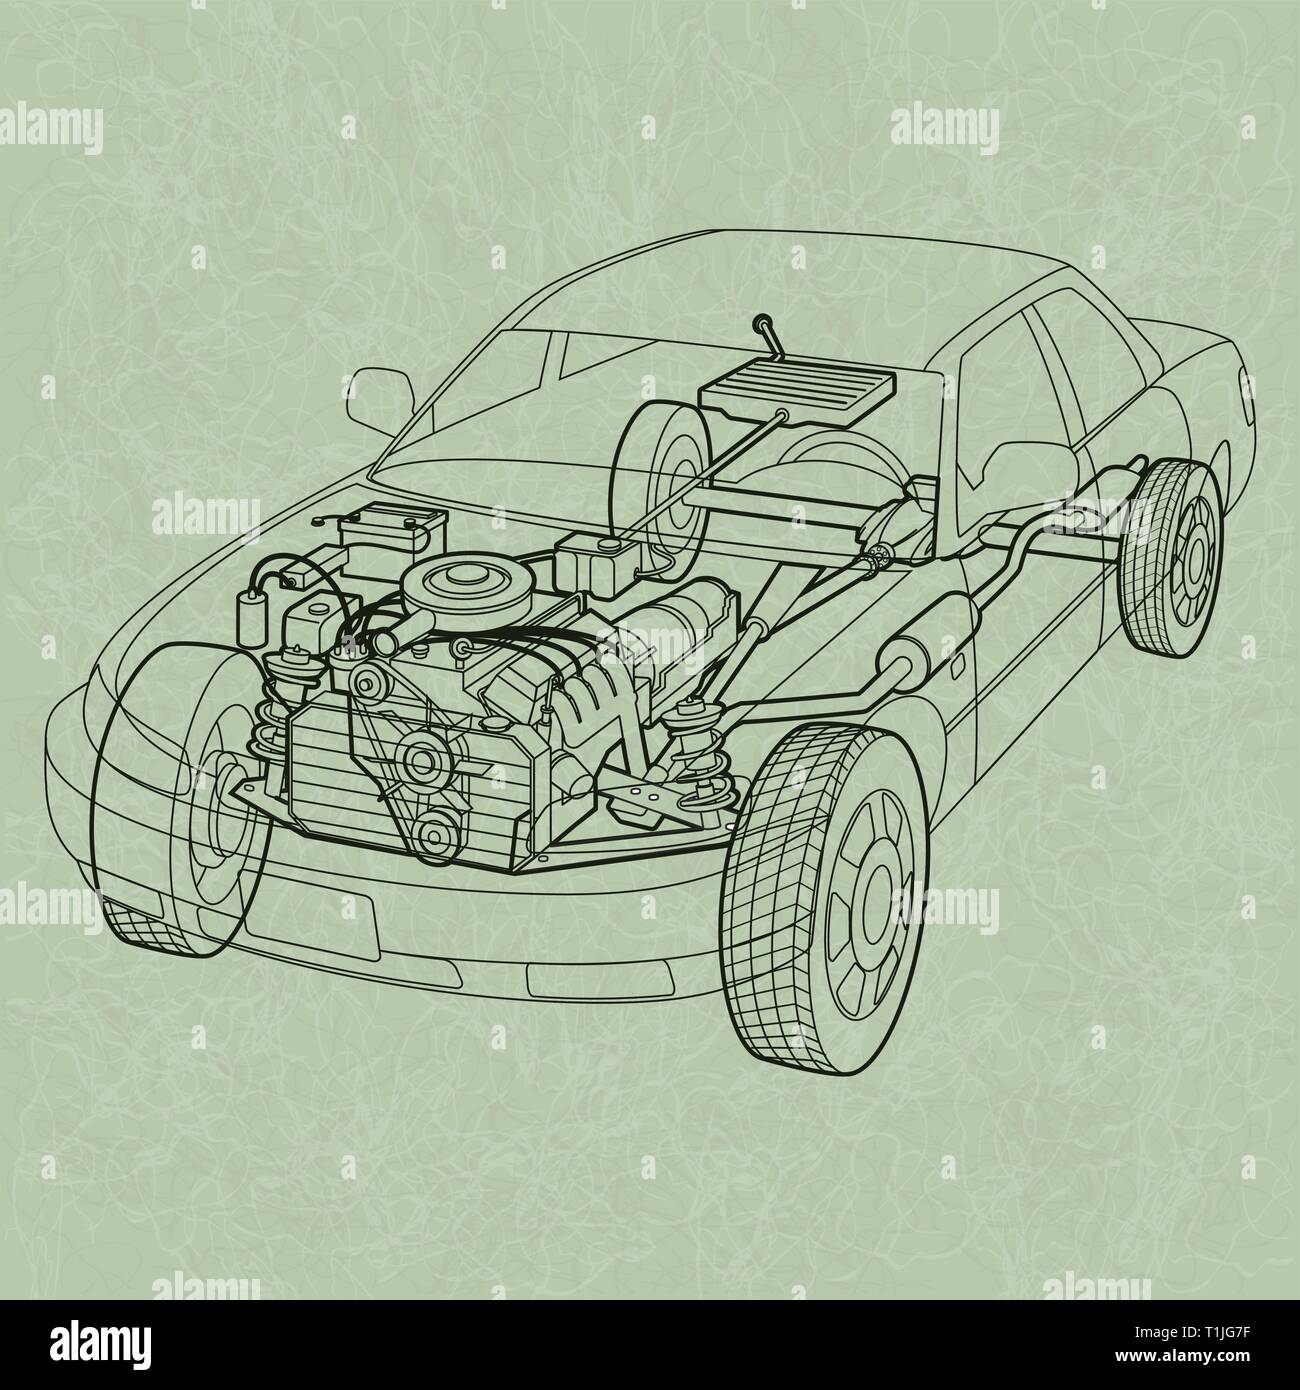 Generic Car Diagram. A ghosting or cross section of a car showing the engine, drive train and suspension. Stock Vector